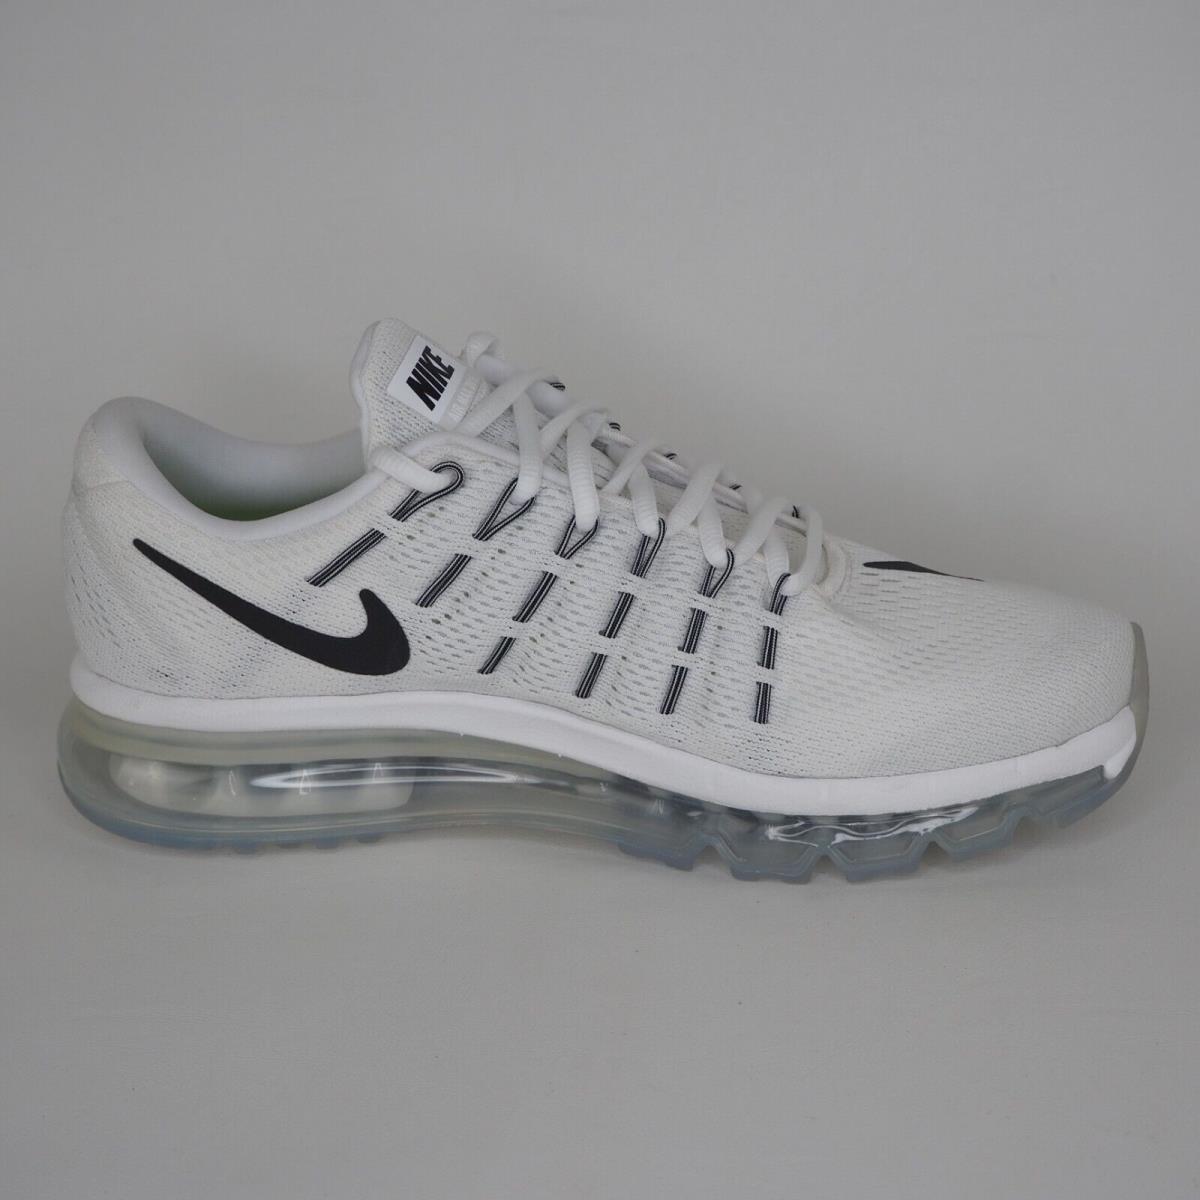 Nike Air Max 2016 Mens Summit 806771 100 Shoes Athletic Sneakers White Size 7.5 | 886912288879 - Nike Air Max - White |